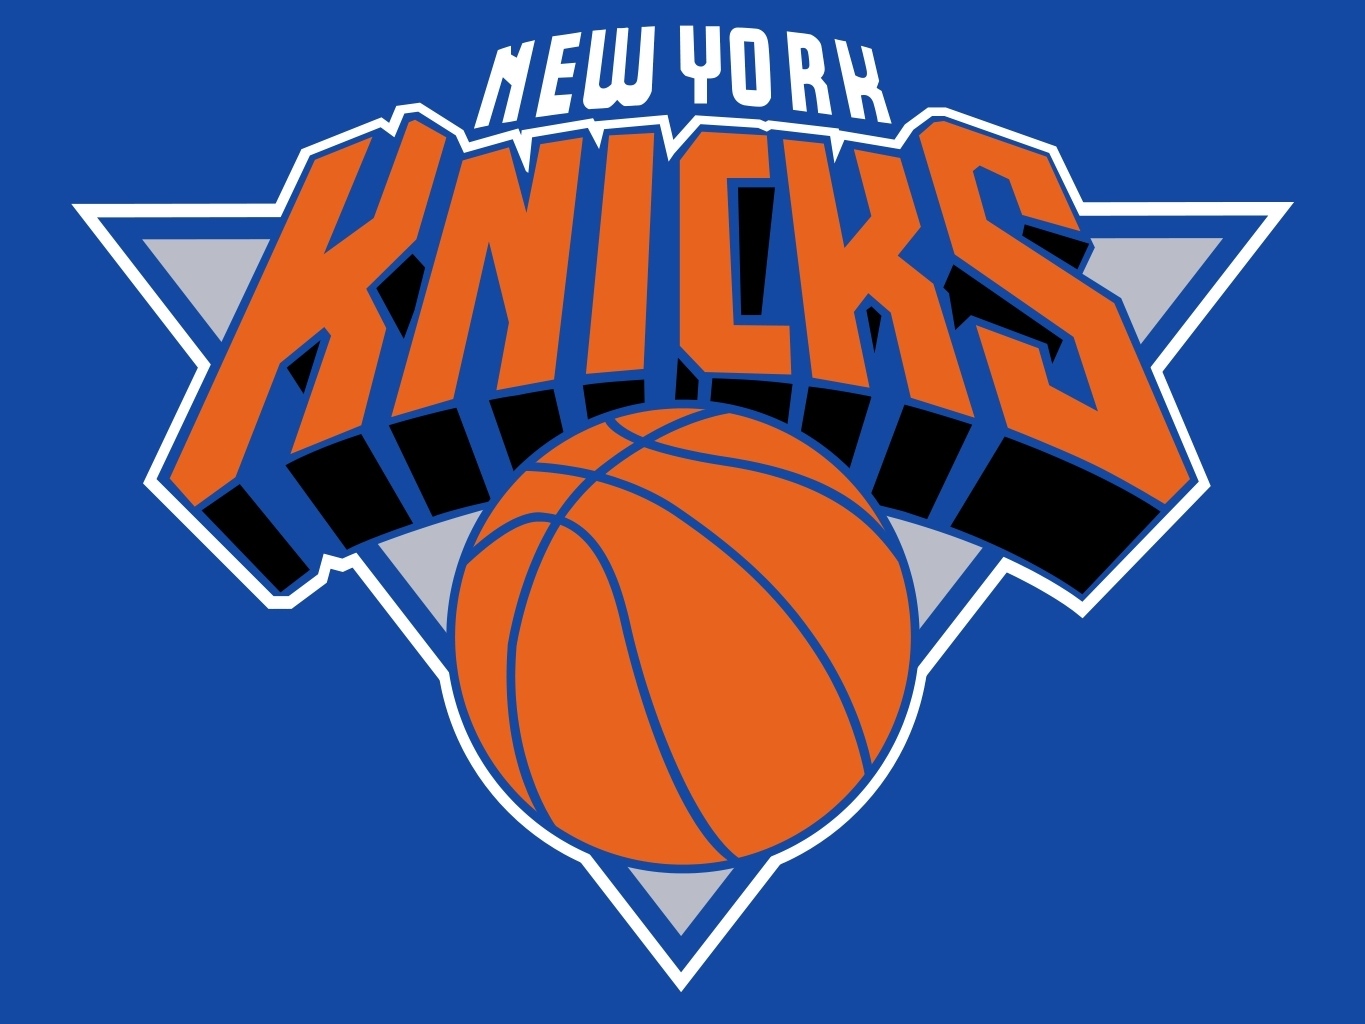 When will the New York Knicks odyssey end?